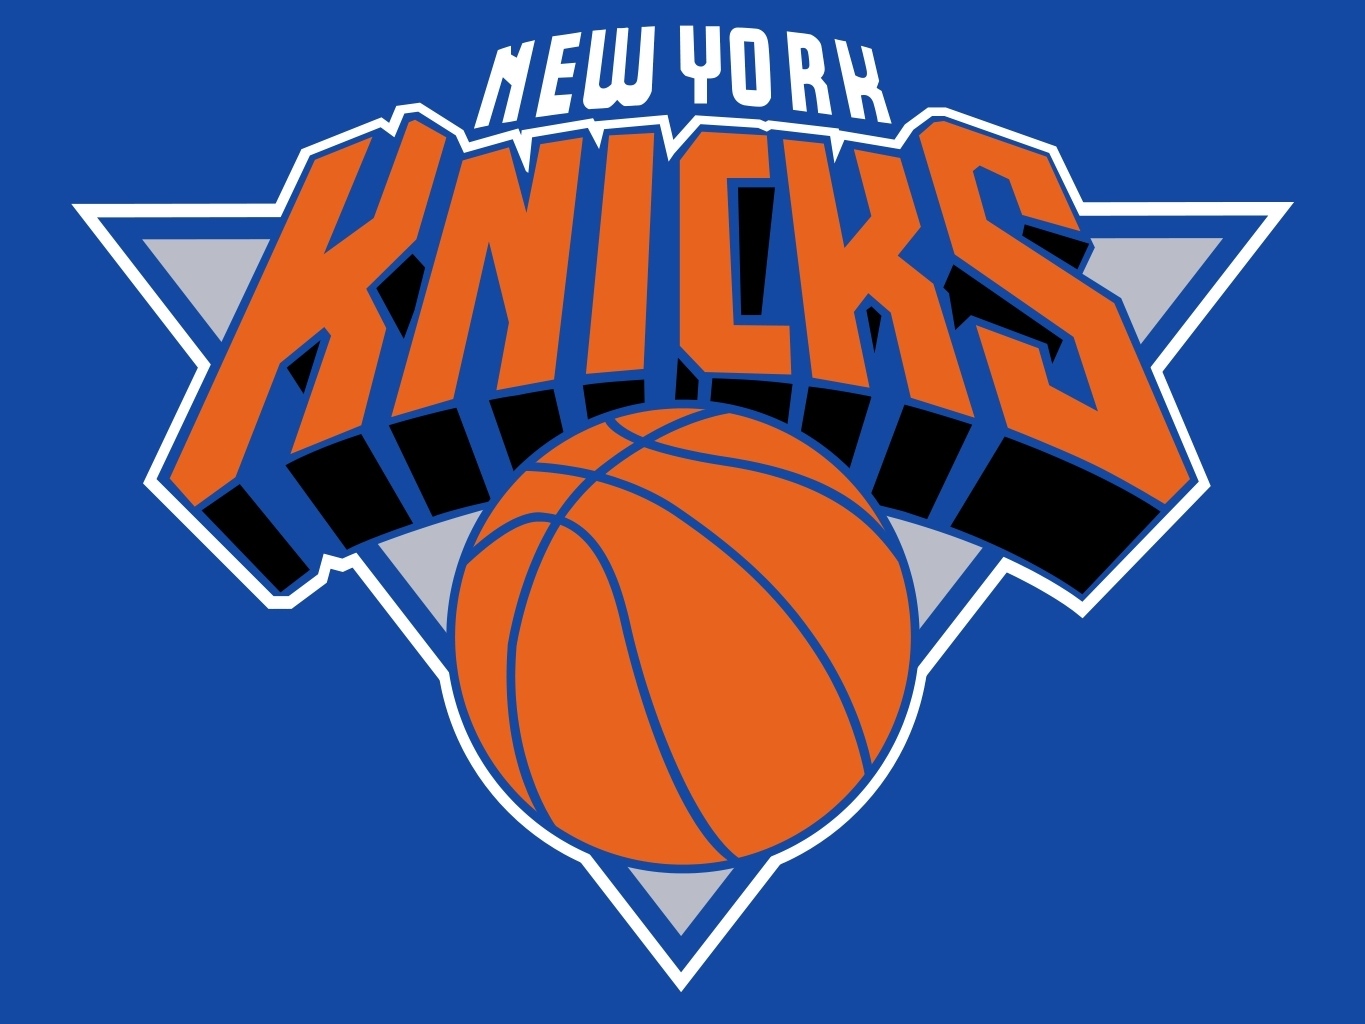 When will the New York Knicks odyssey end?